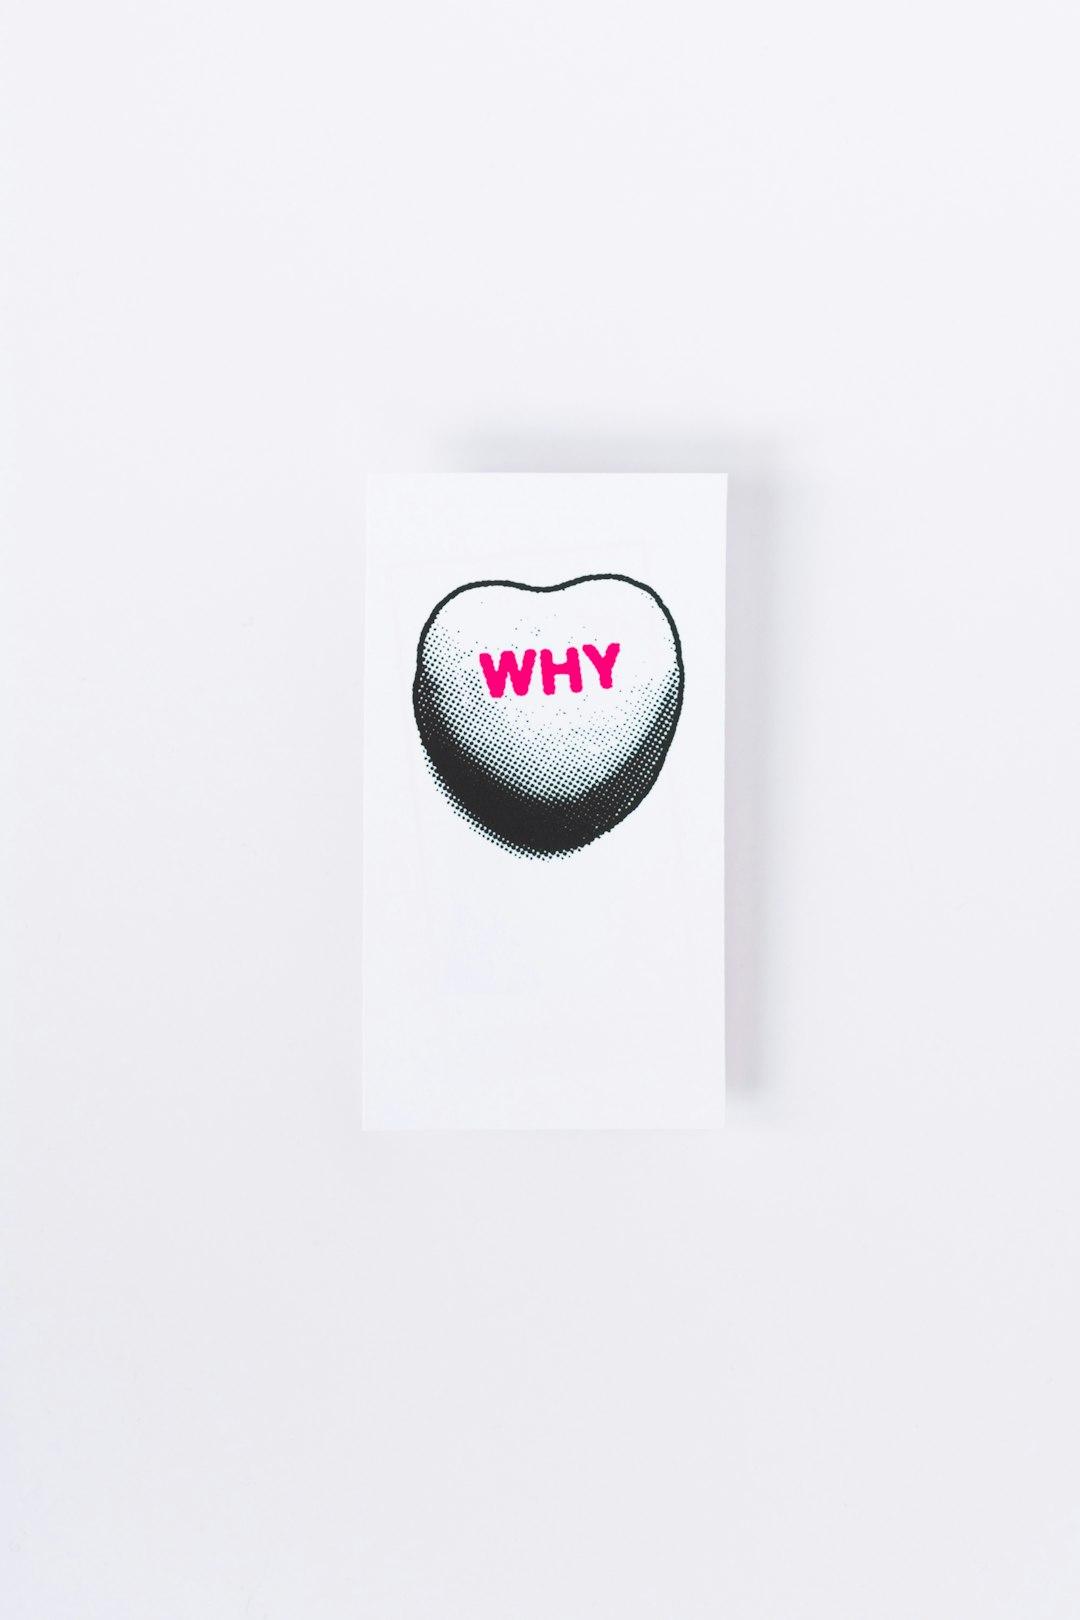 Ans The "WHY"